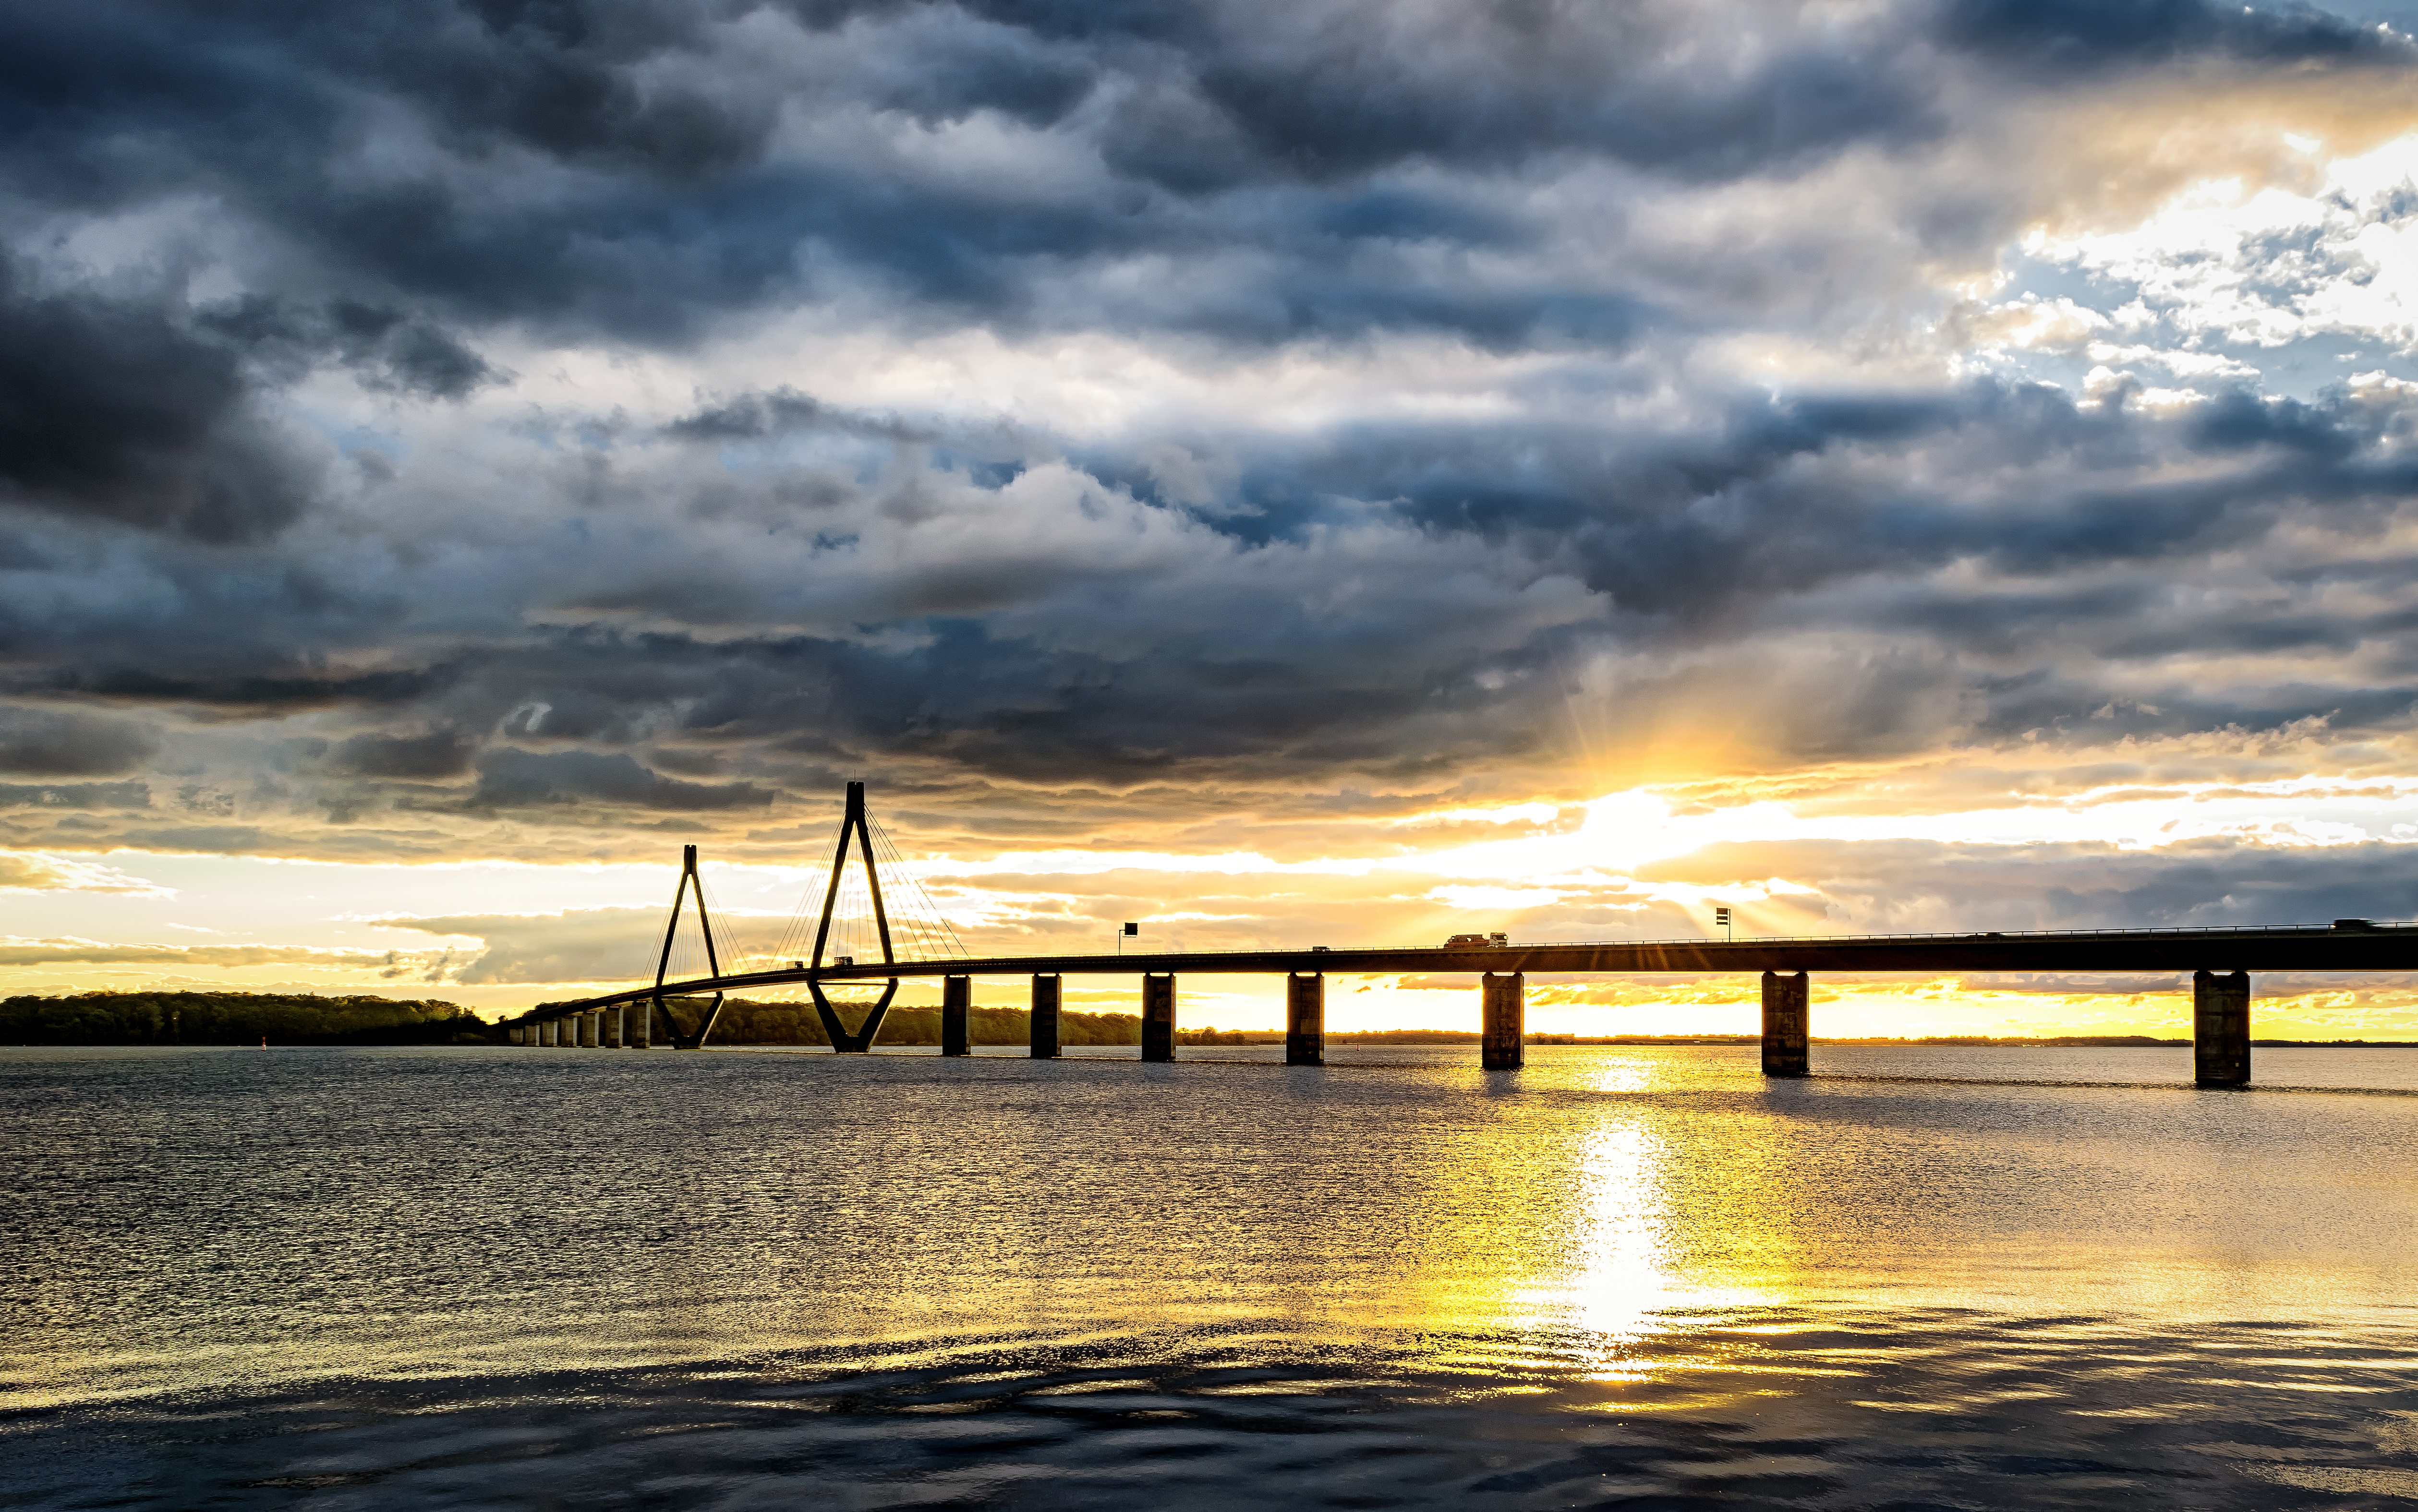 A large bridge over the water in Denmark